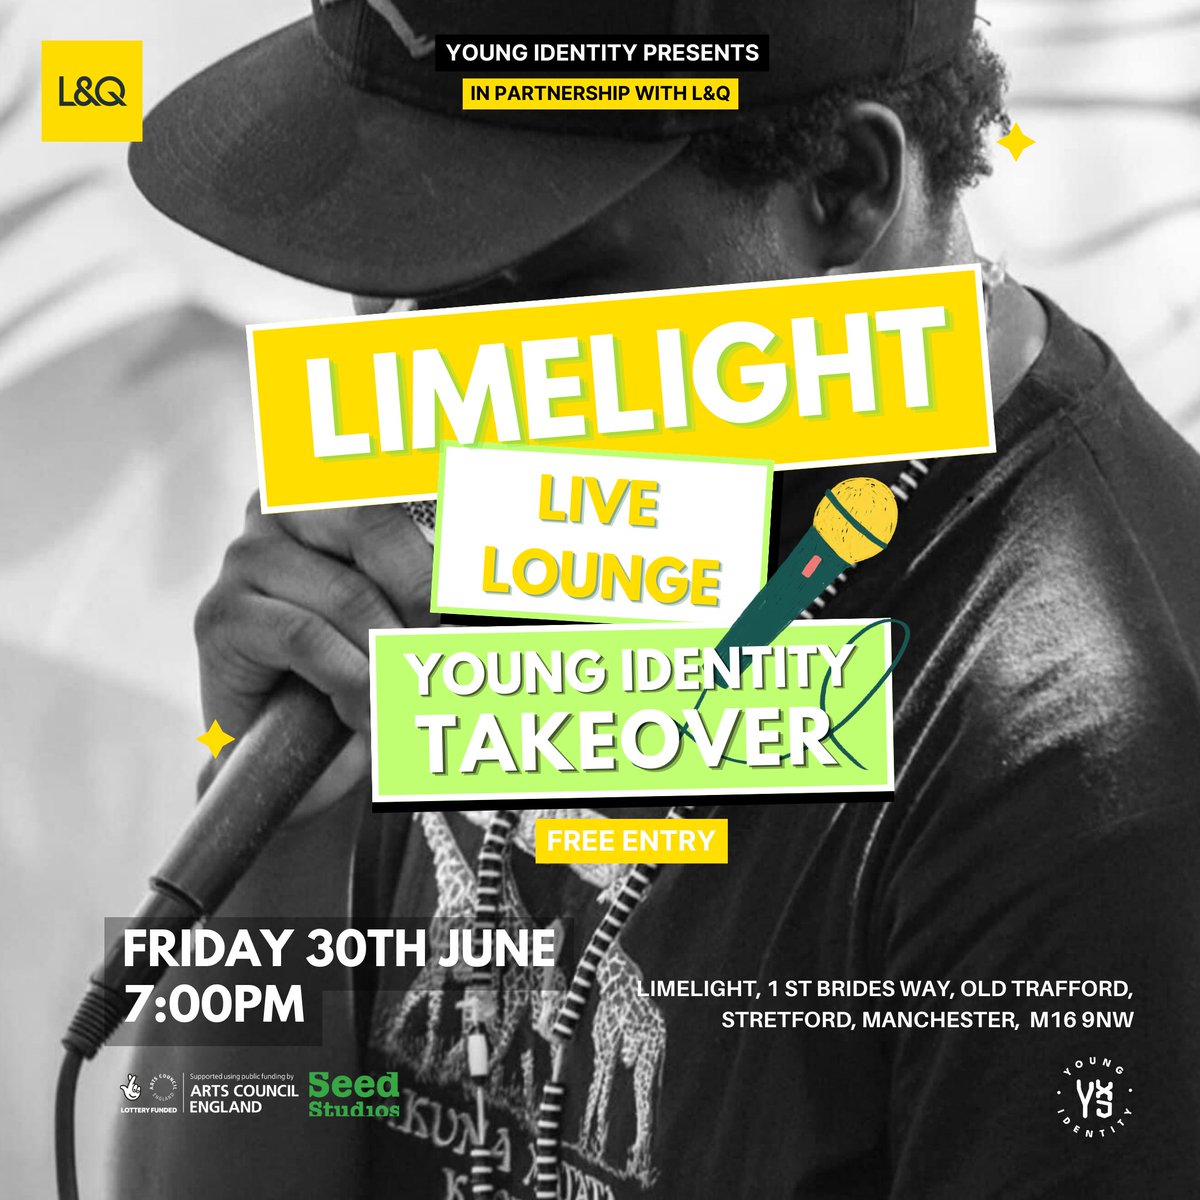 💫 TWO DAYS TO GO! Do you have your free tickets to our Limelight Live Lounge takeover THIS FRIDAY? Join us for a night of performances that will leave you feeling inspired. In partnership with @LQHomesMatter FREE Tickets: limelightlivelounge.eventbrite.co.uk